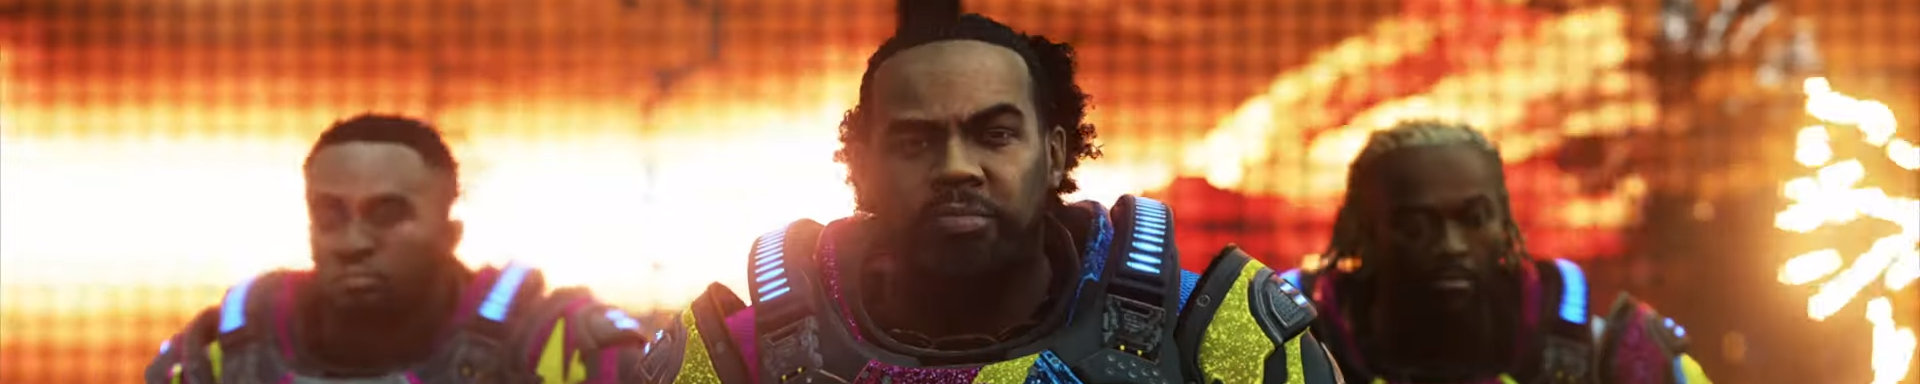 Gears 5 The New Day price slice